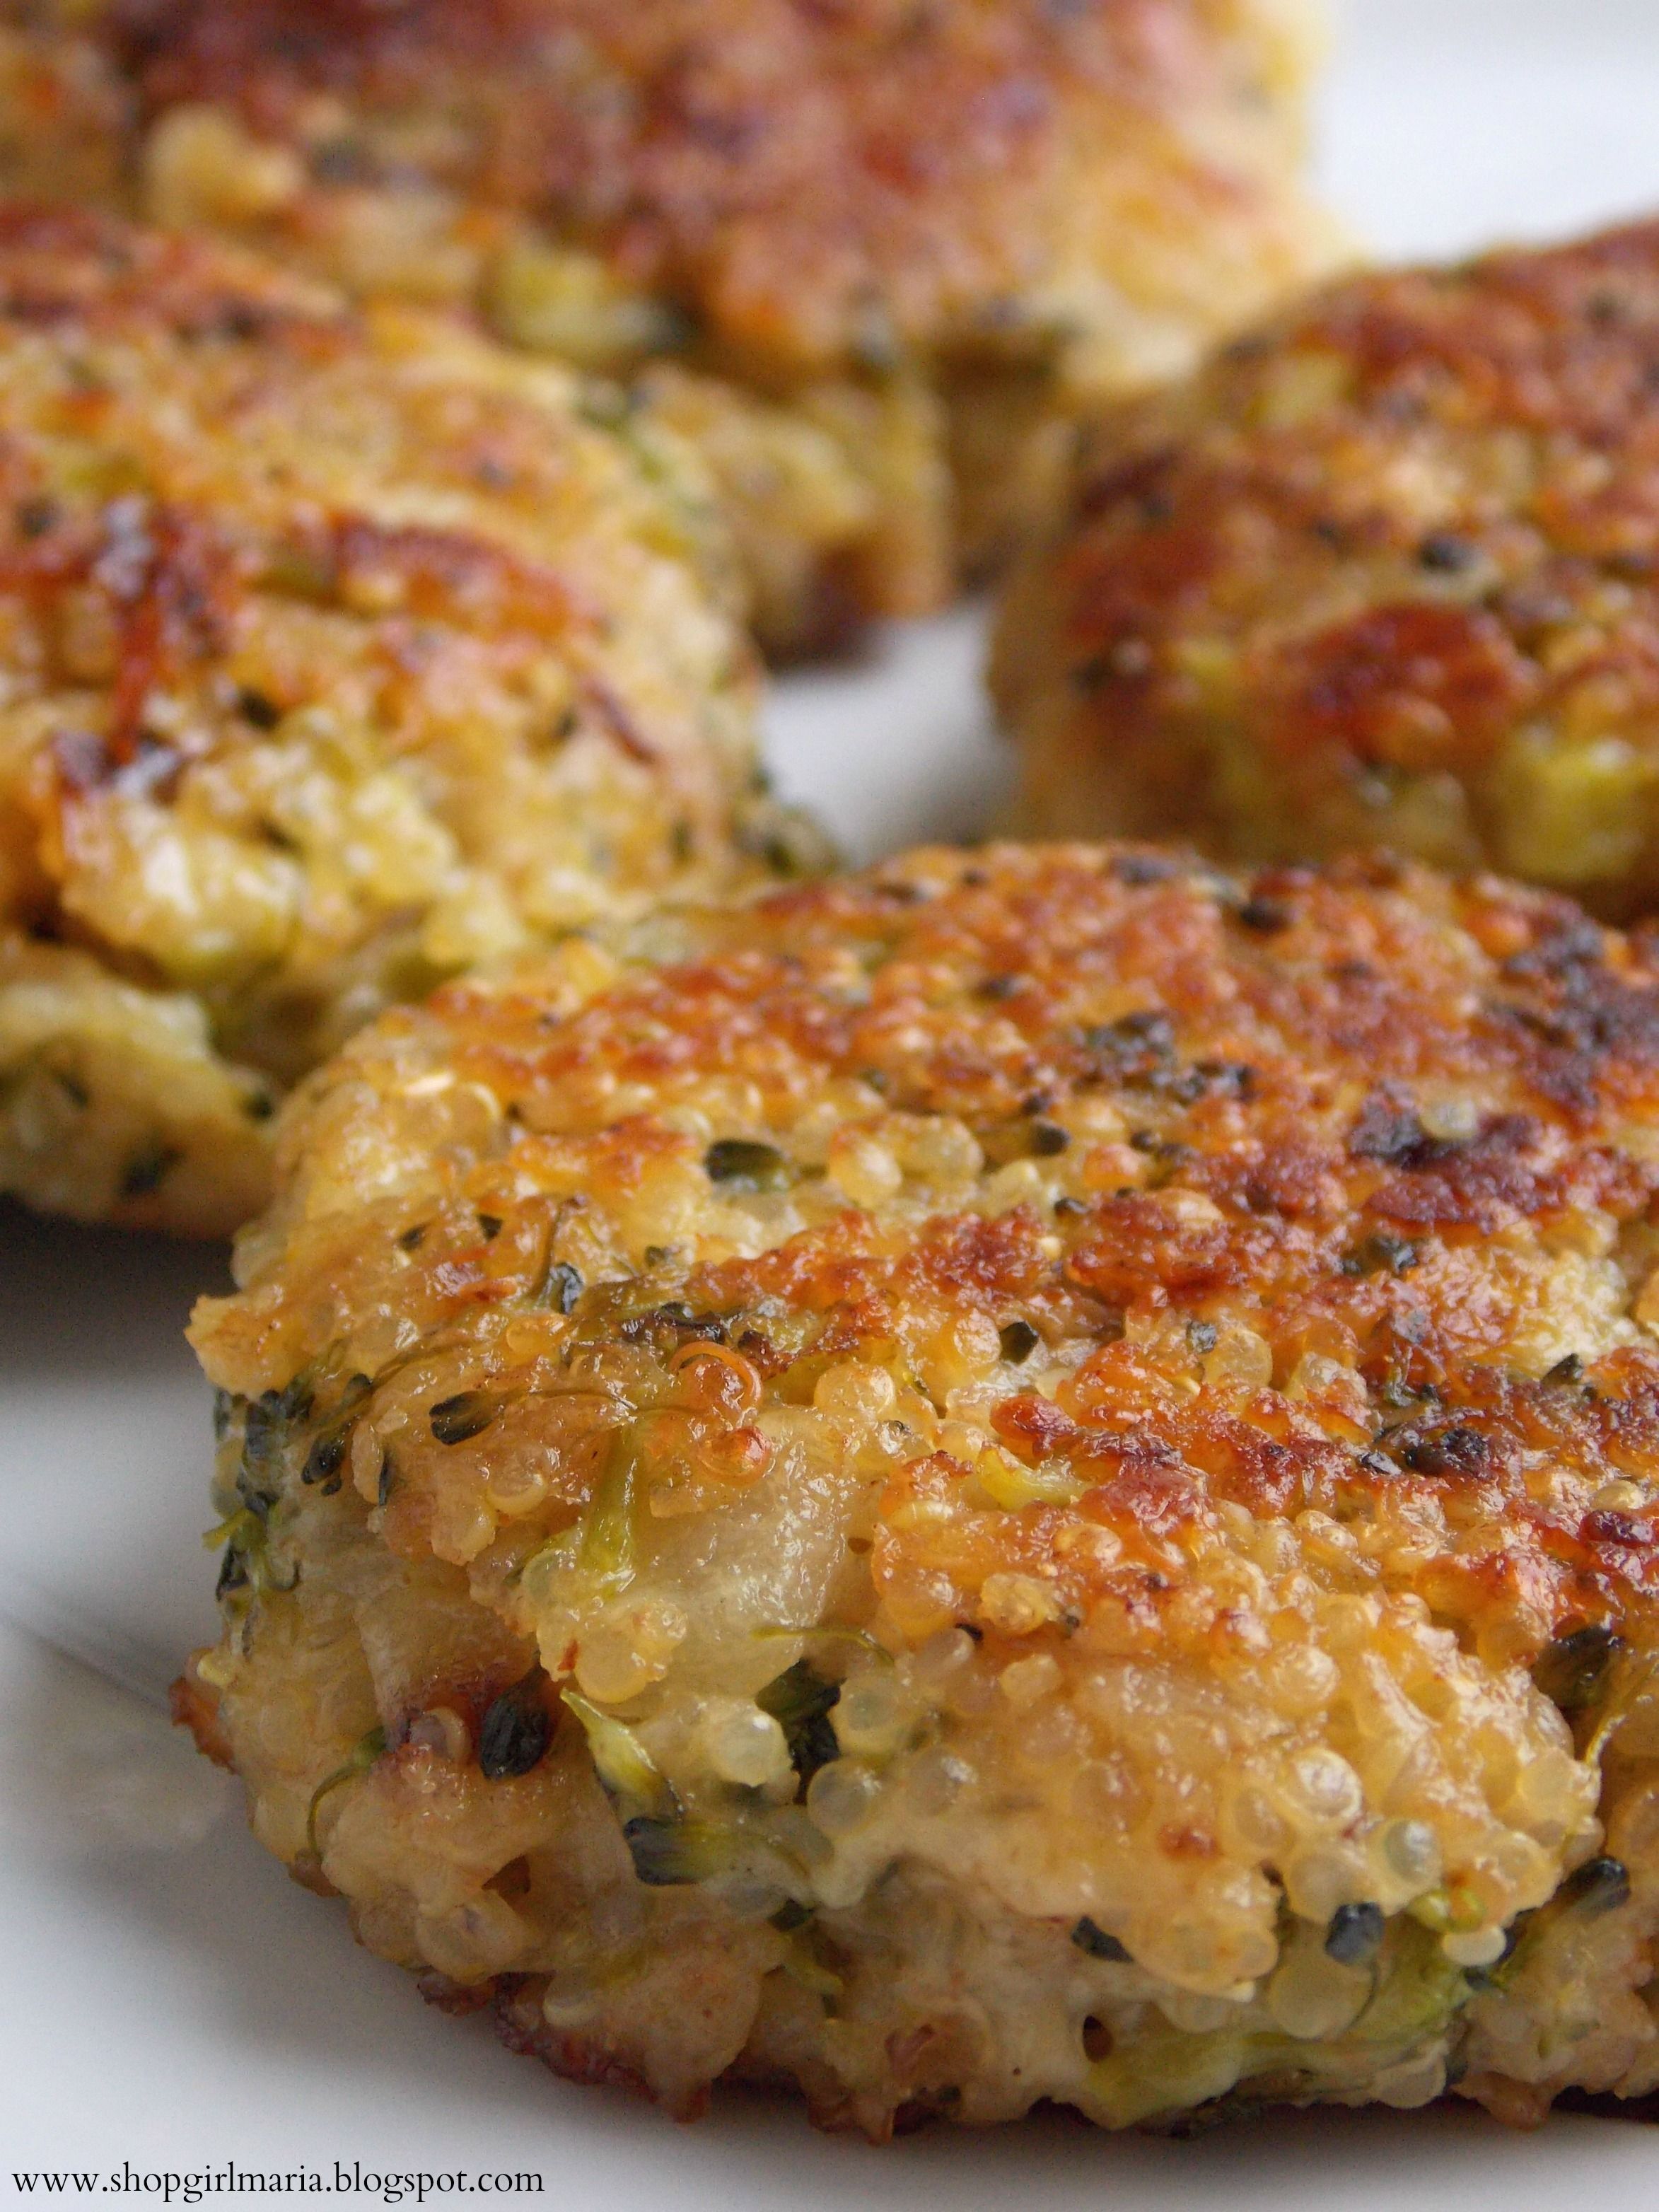 30 Meal Ideas for a 1-year-old -   20 quinoa recipes patties
 ideas